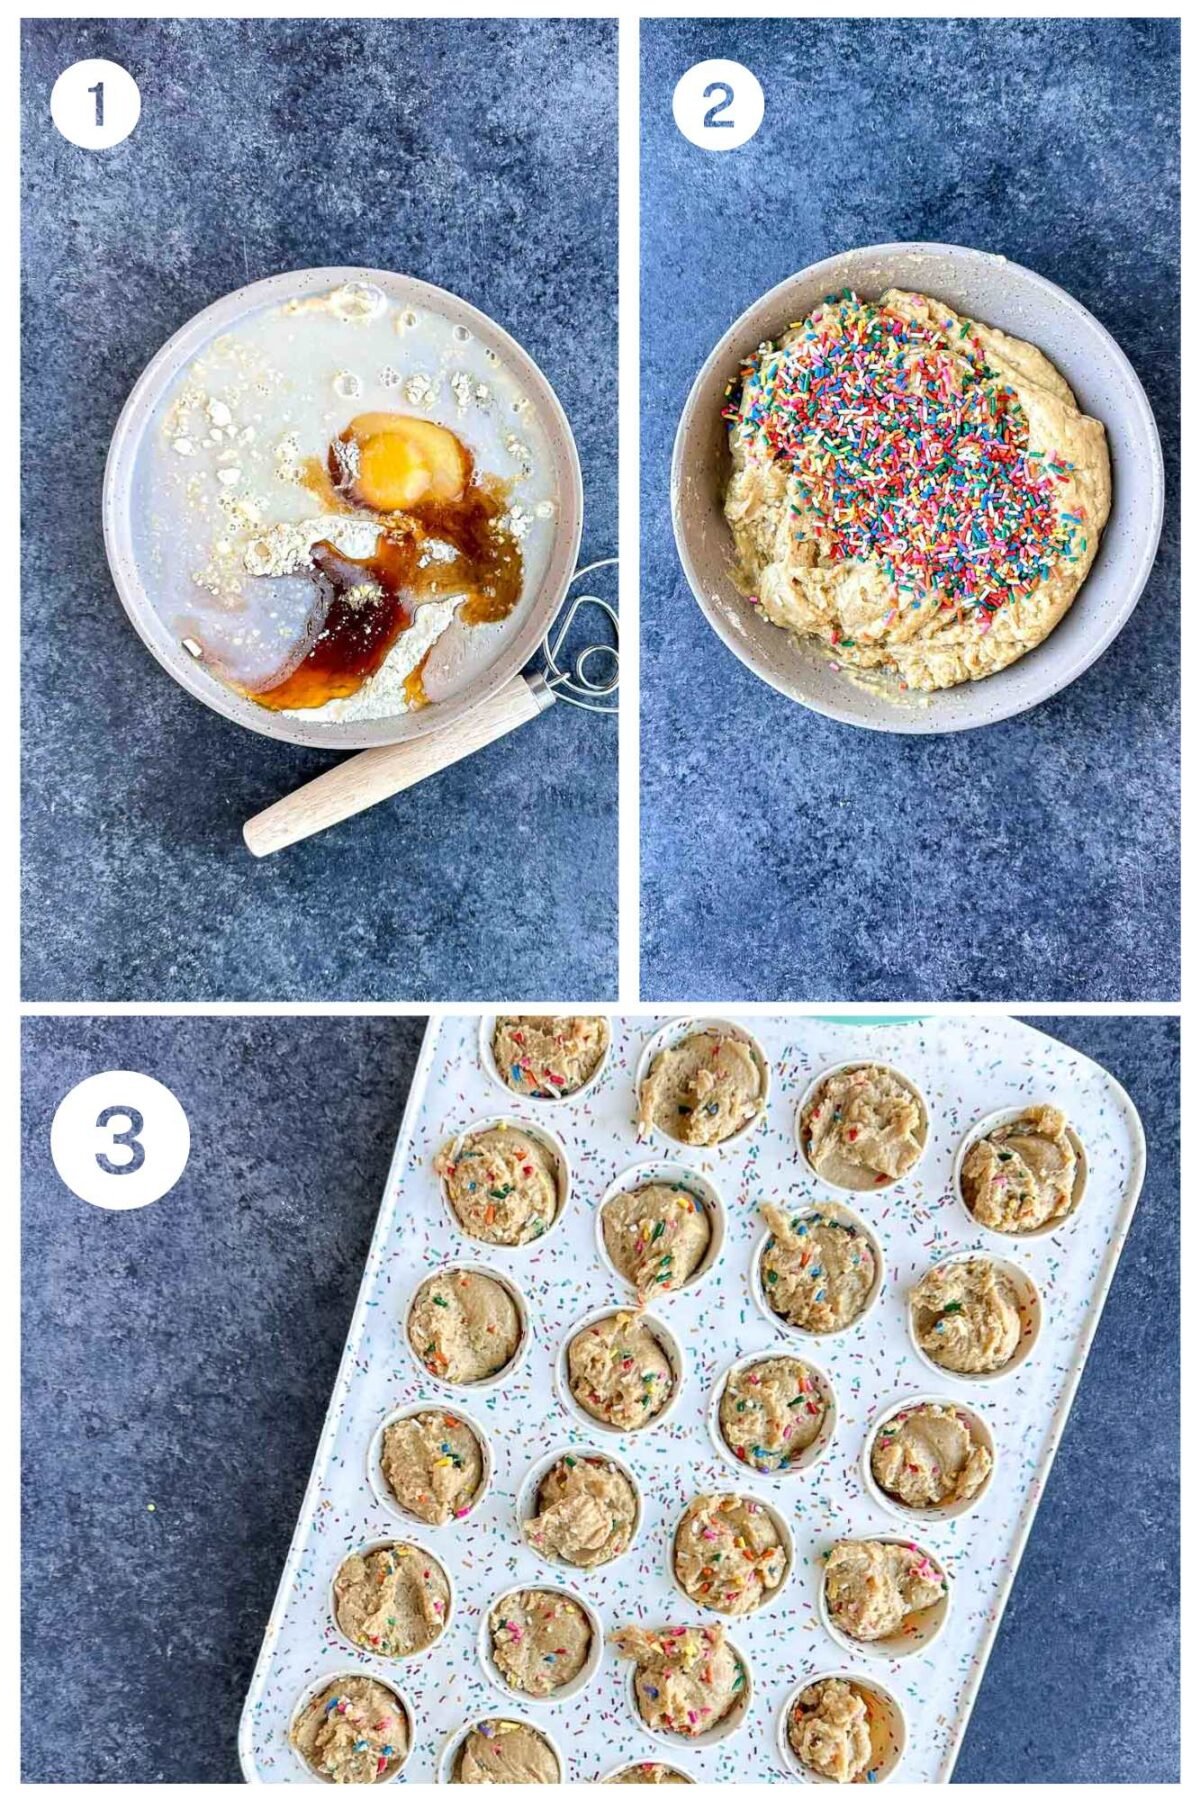 Enjoy guilt-free Funfetti Protein Muffins! A tasty treat packed with protein and sprinkles. Perfect for a healthy snack.